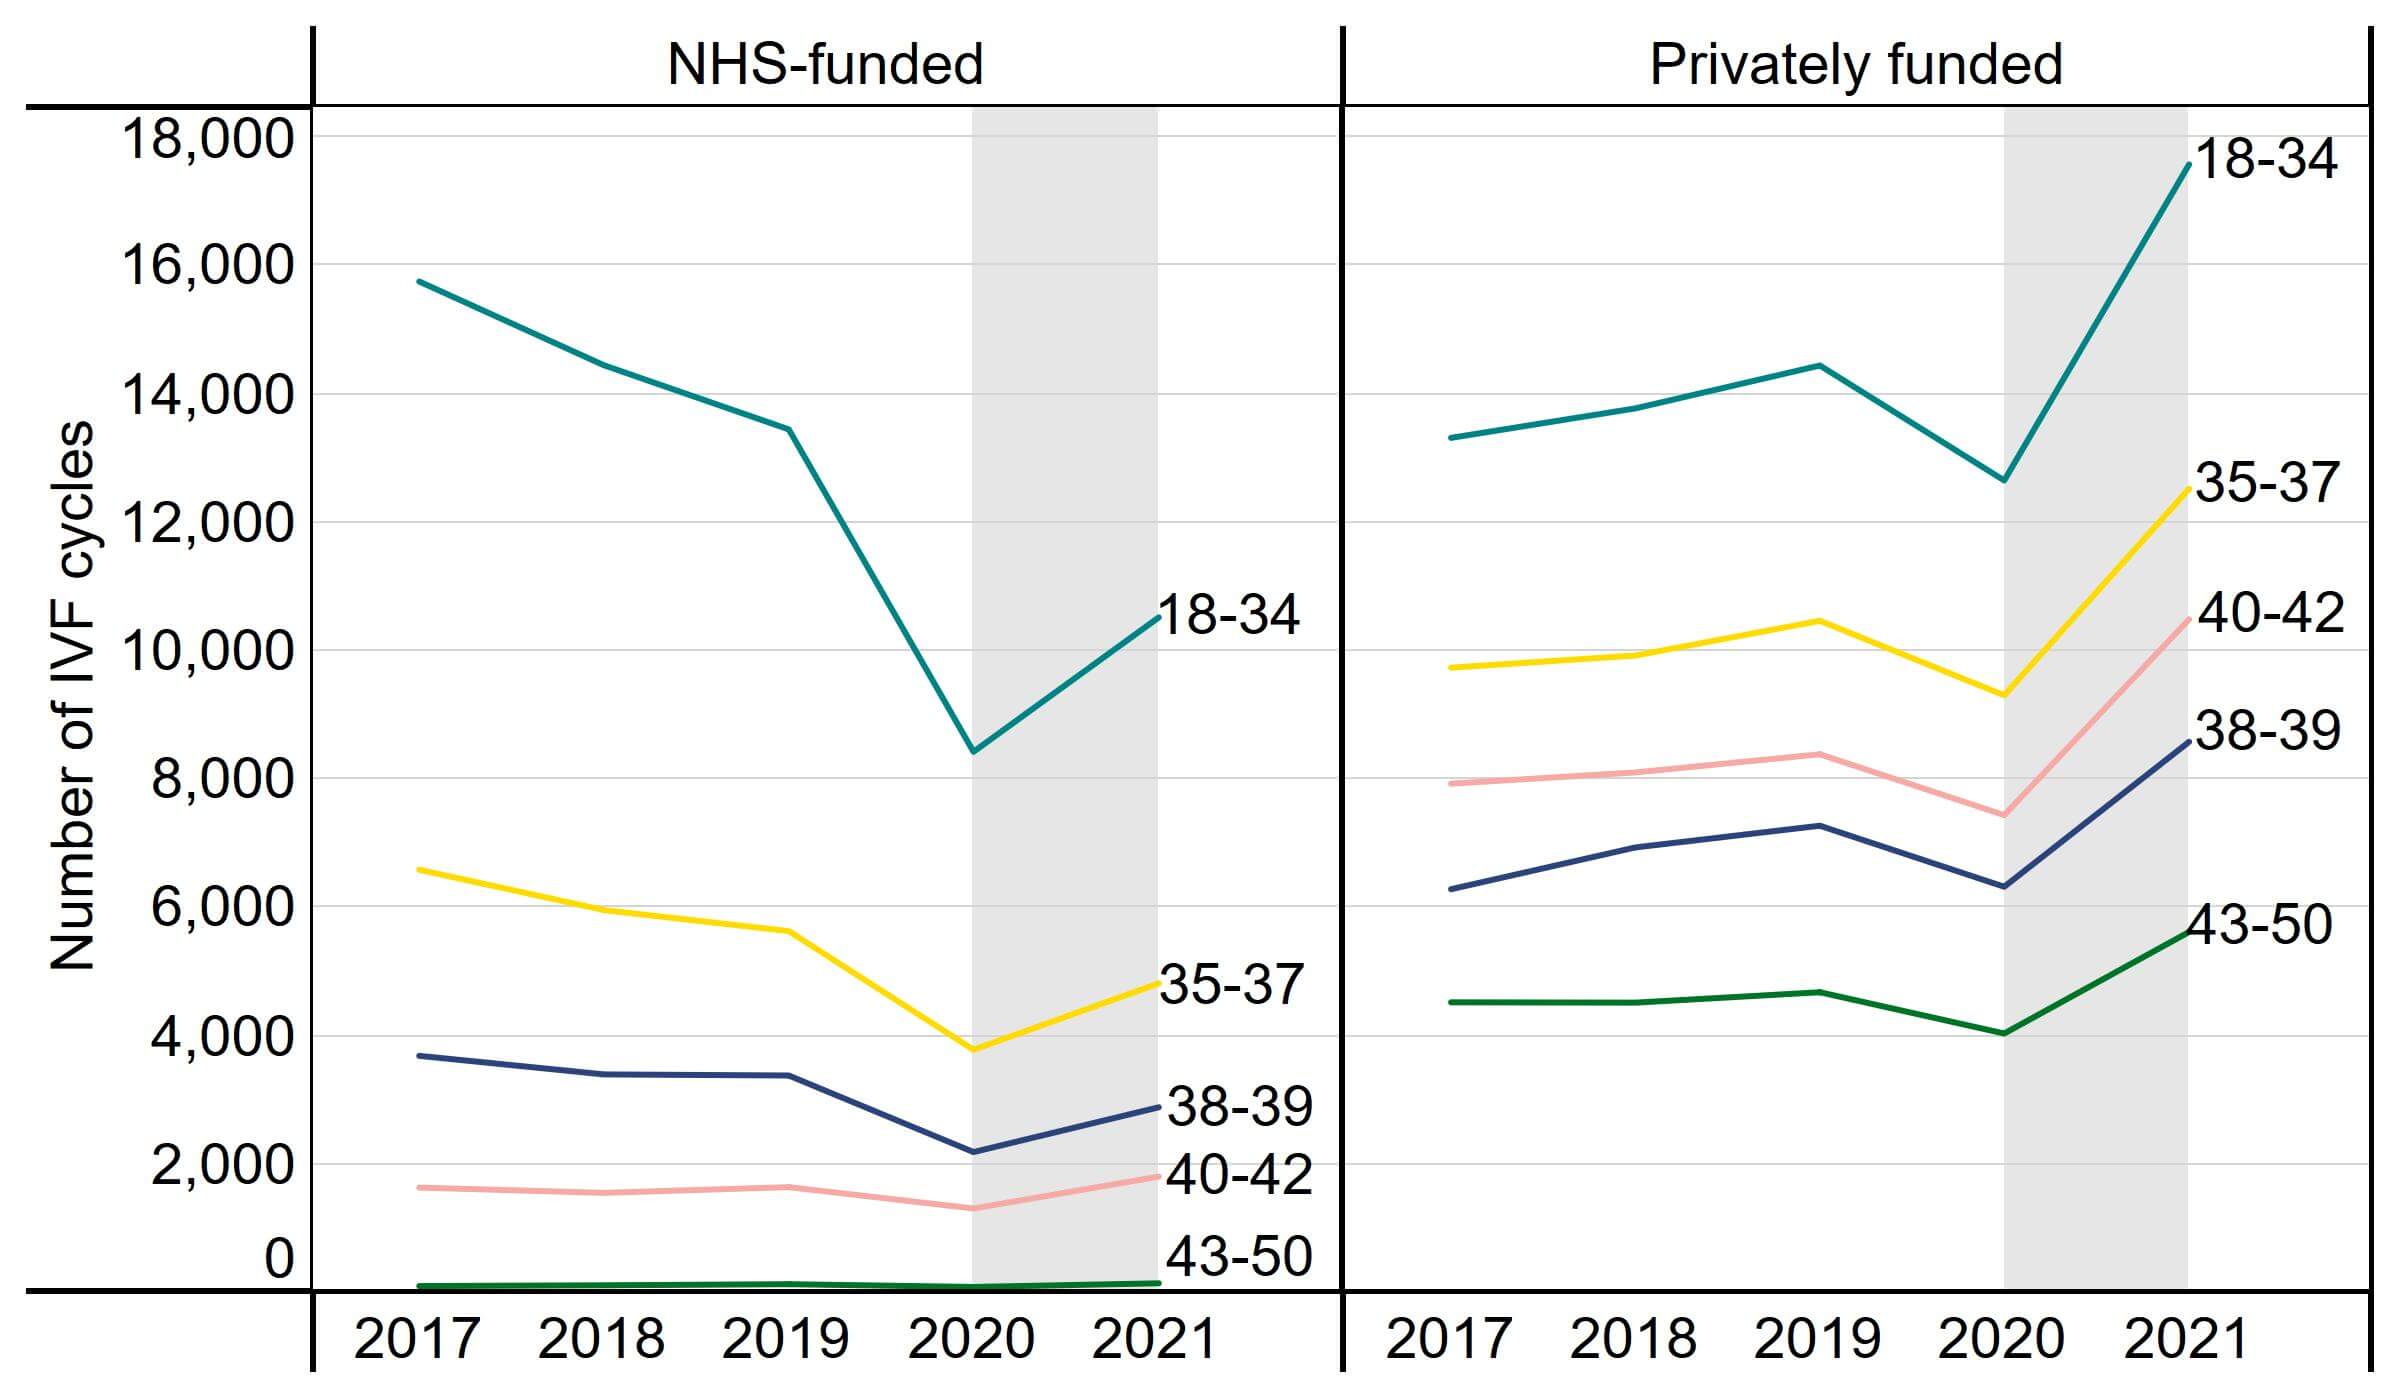 Line graphs showing increase in both numbers of NHS-funded and privately funded IVF cycles in all age groups from 2020.